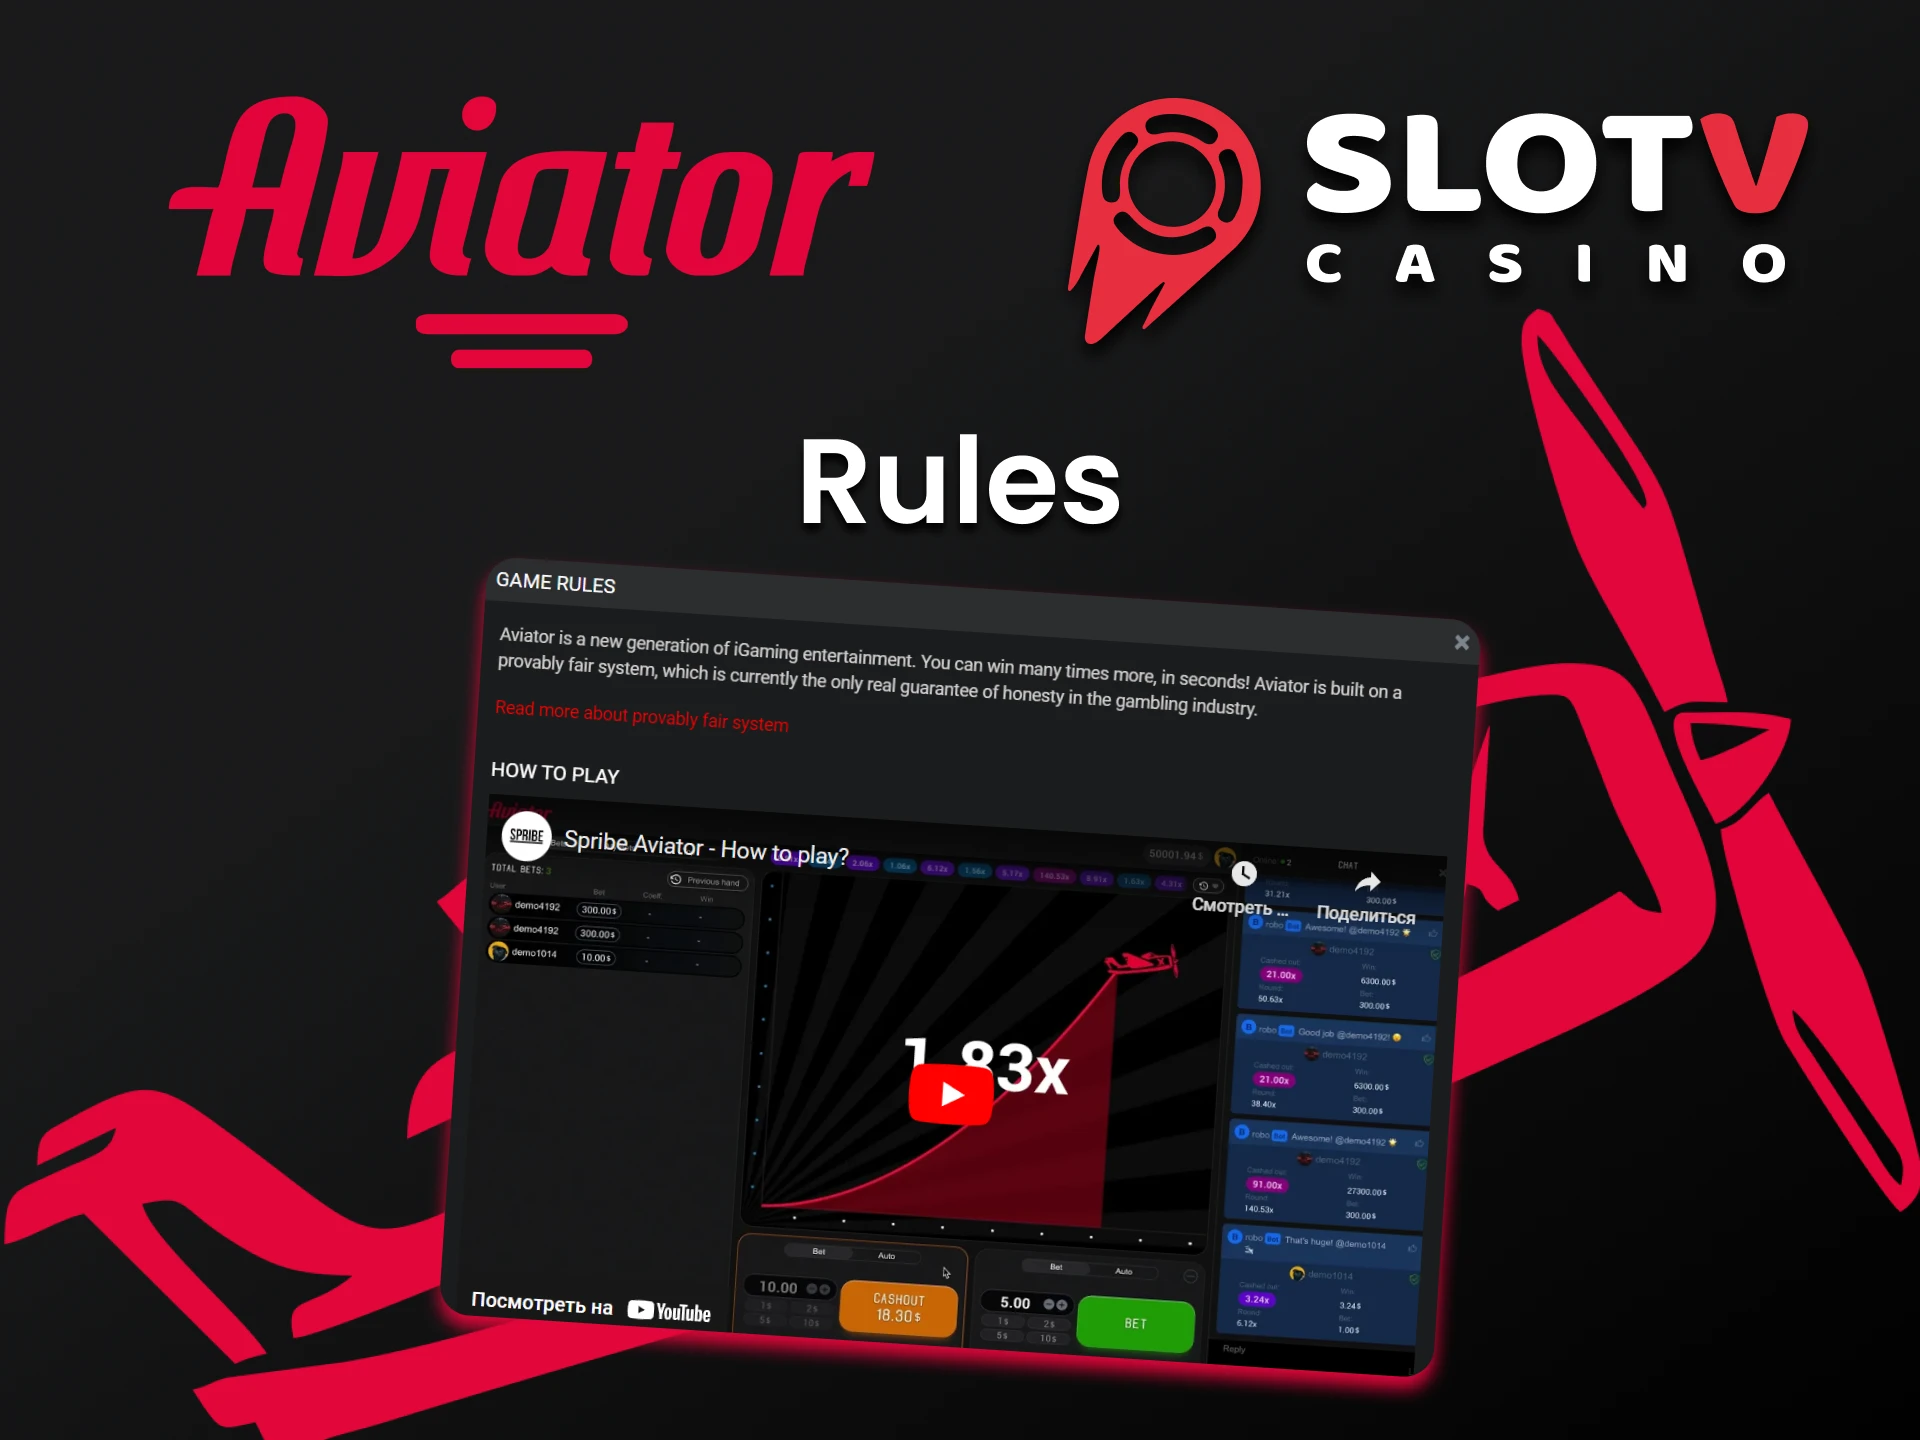 Learn the rules of the Aviator game on SlotV.